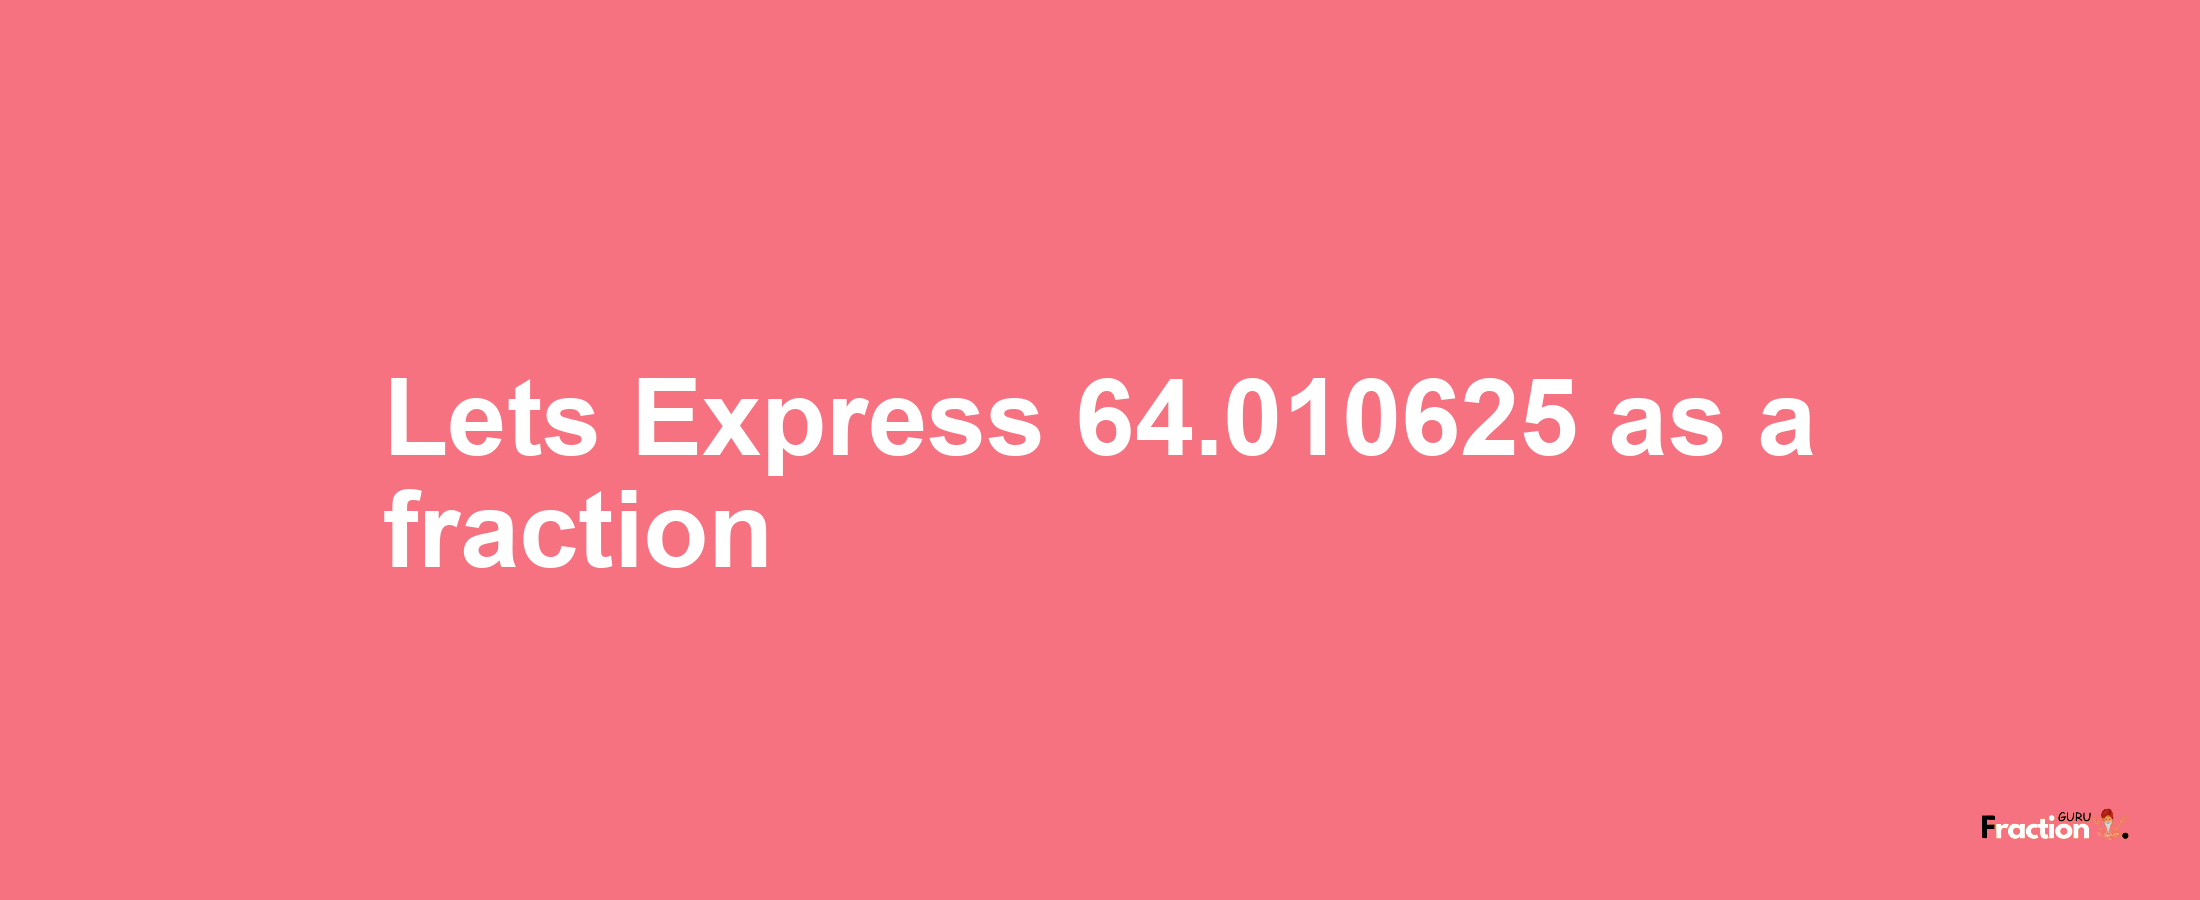 Lets Express 64.010625 as afraction